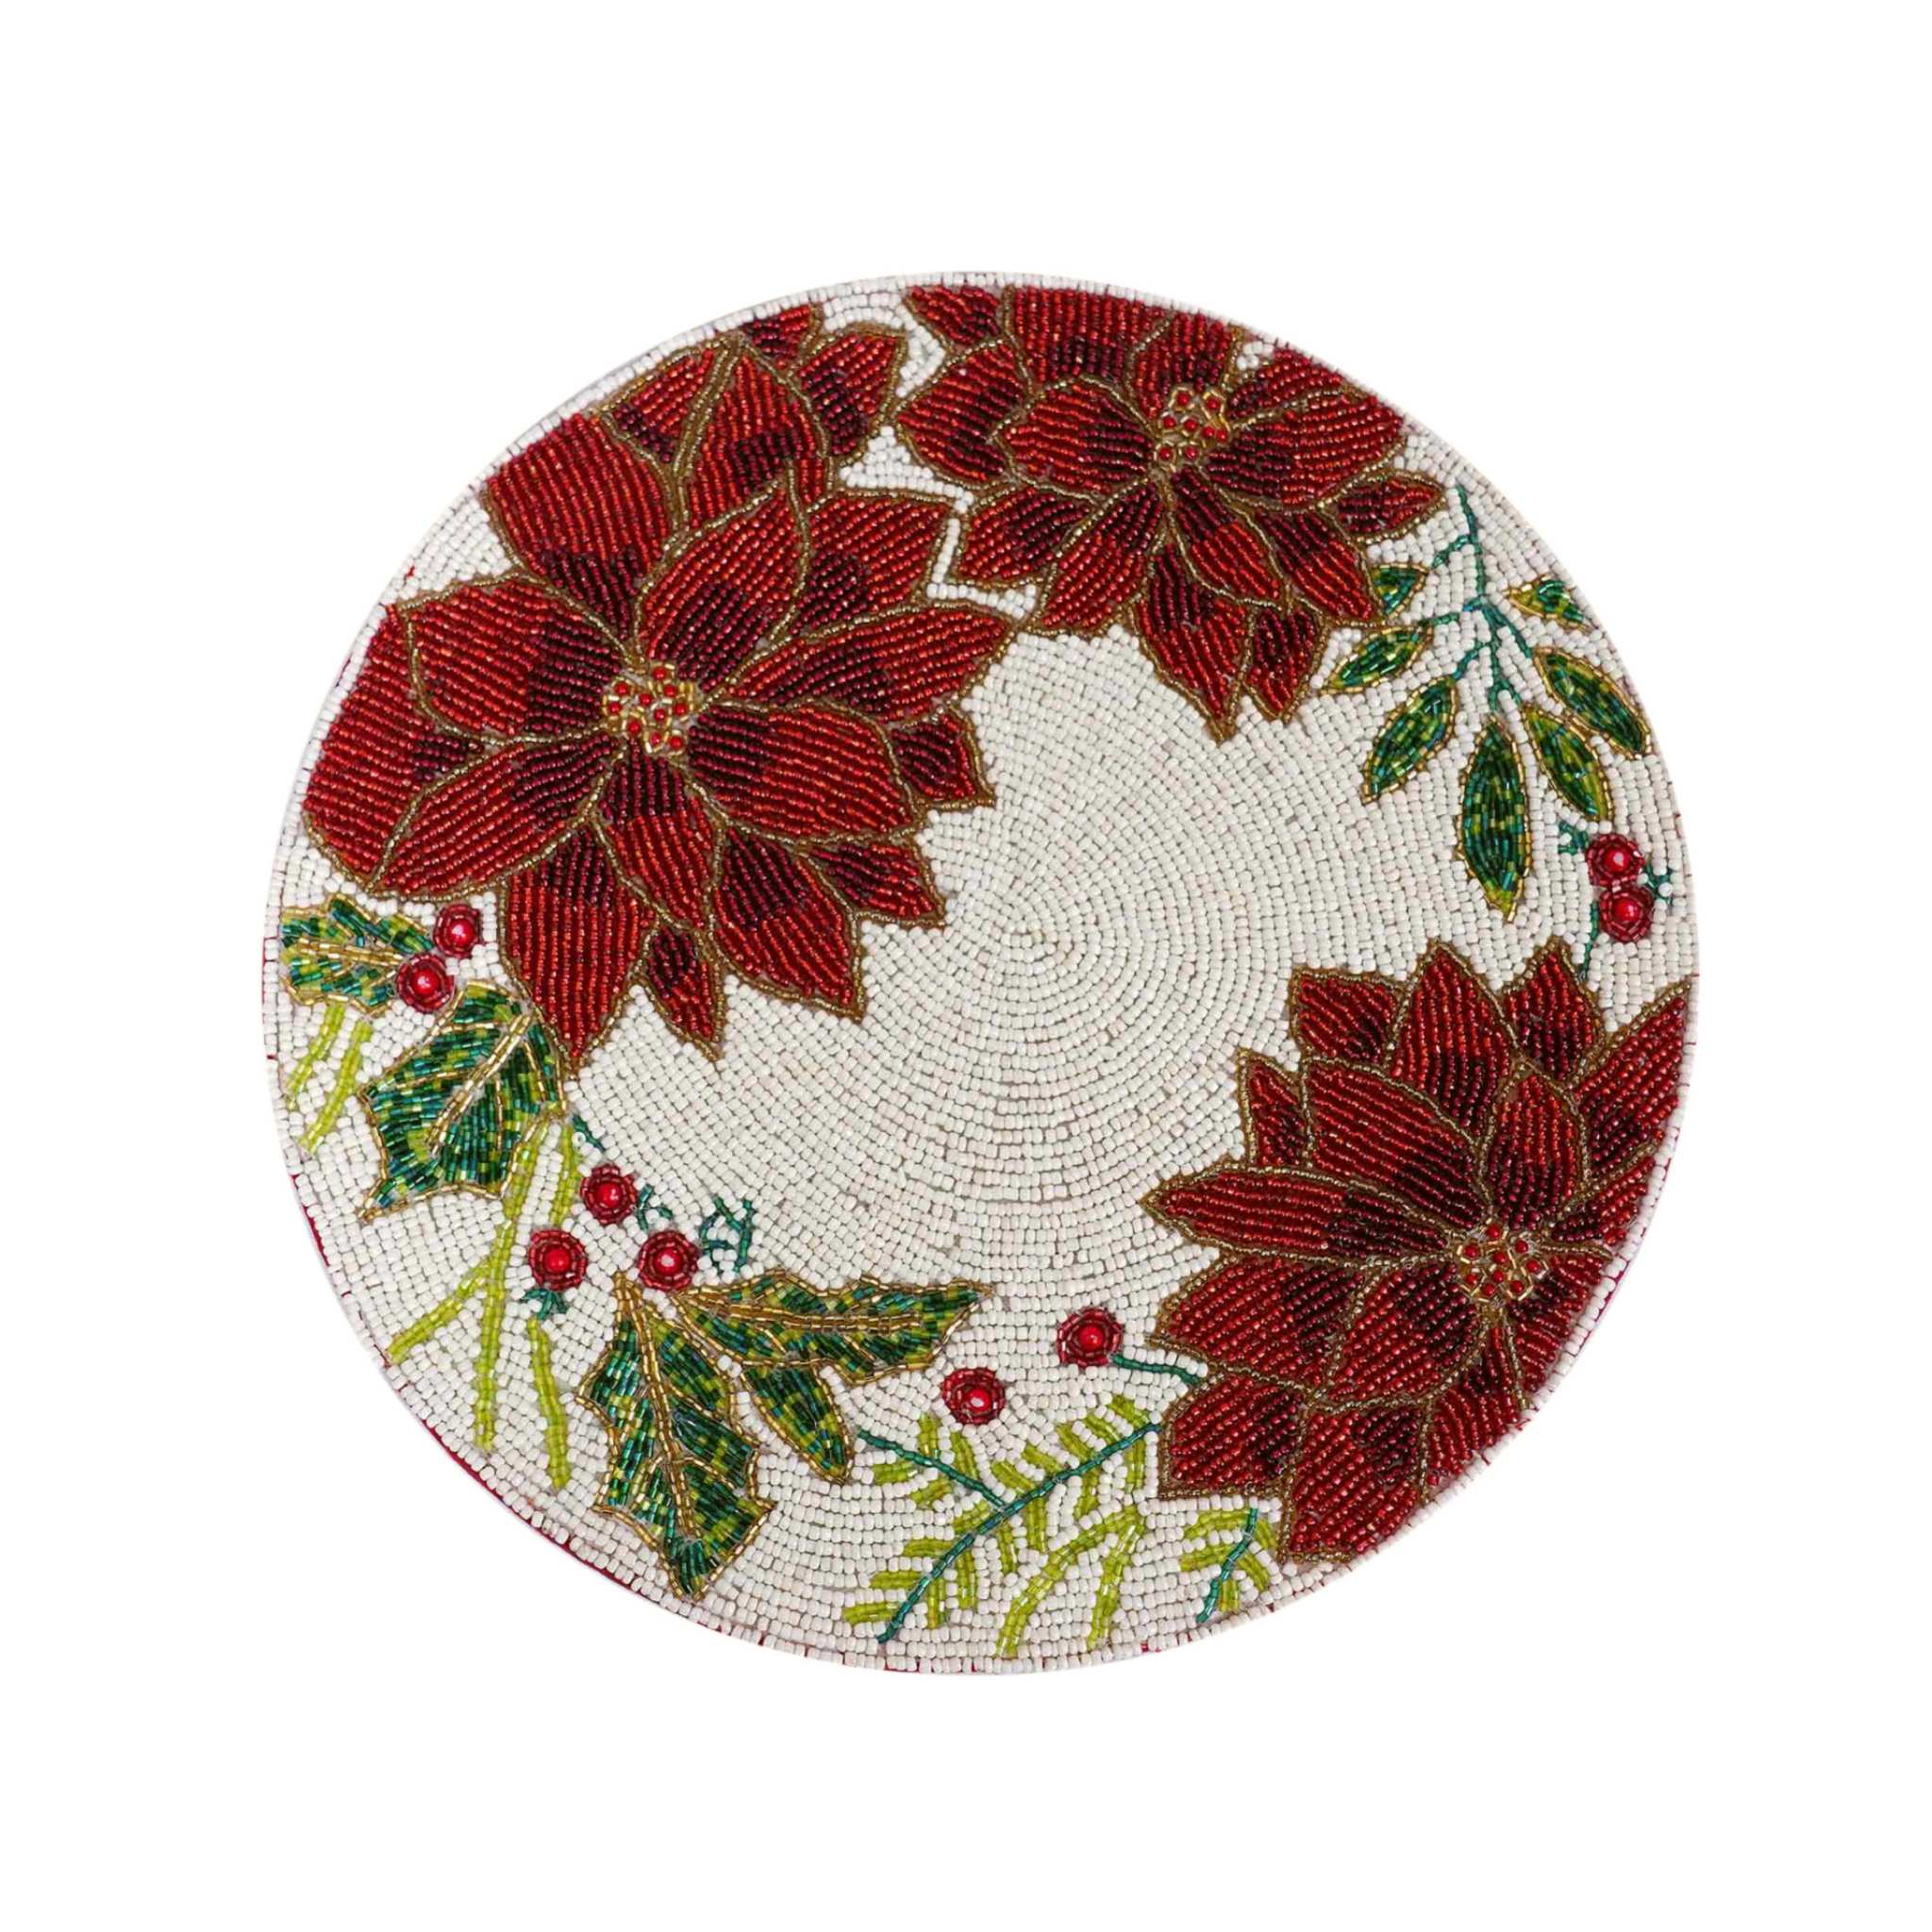 Poinsettia & Holly Bead Embroidered Placemat in Cream, Red & Green, Set of 2